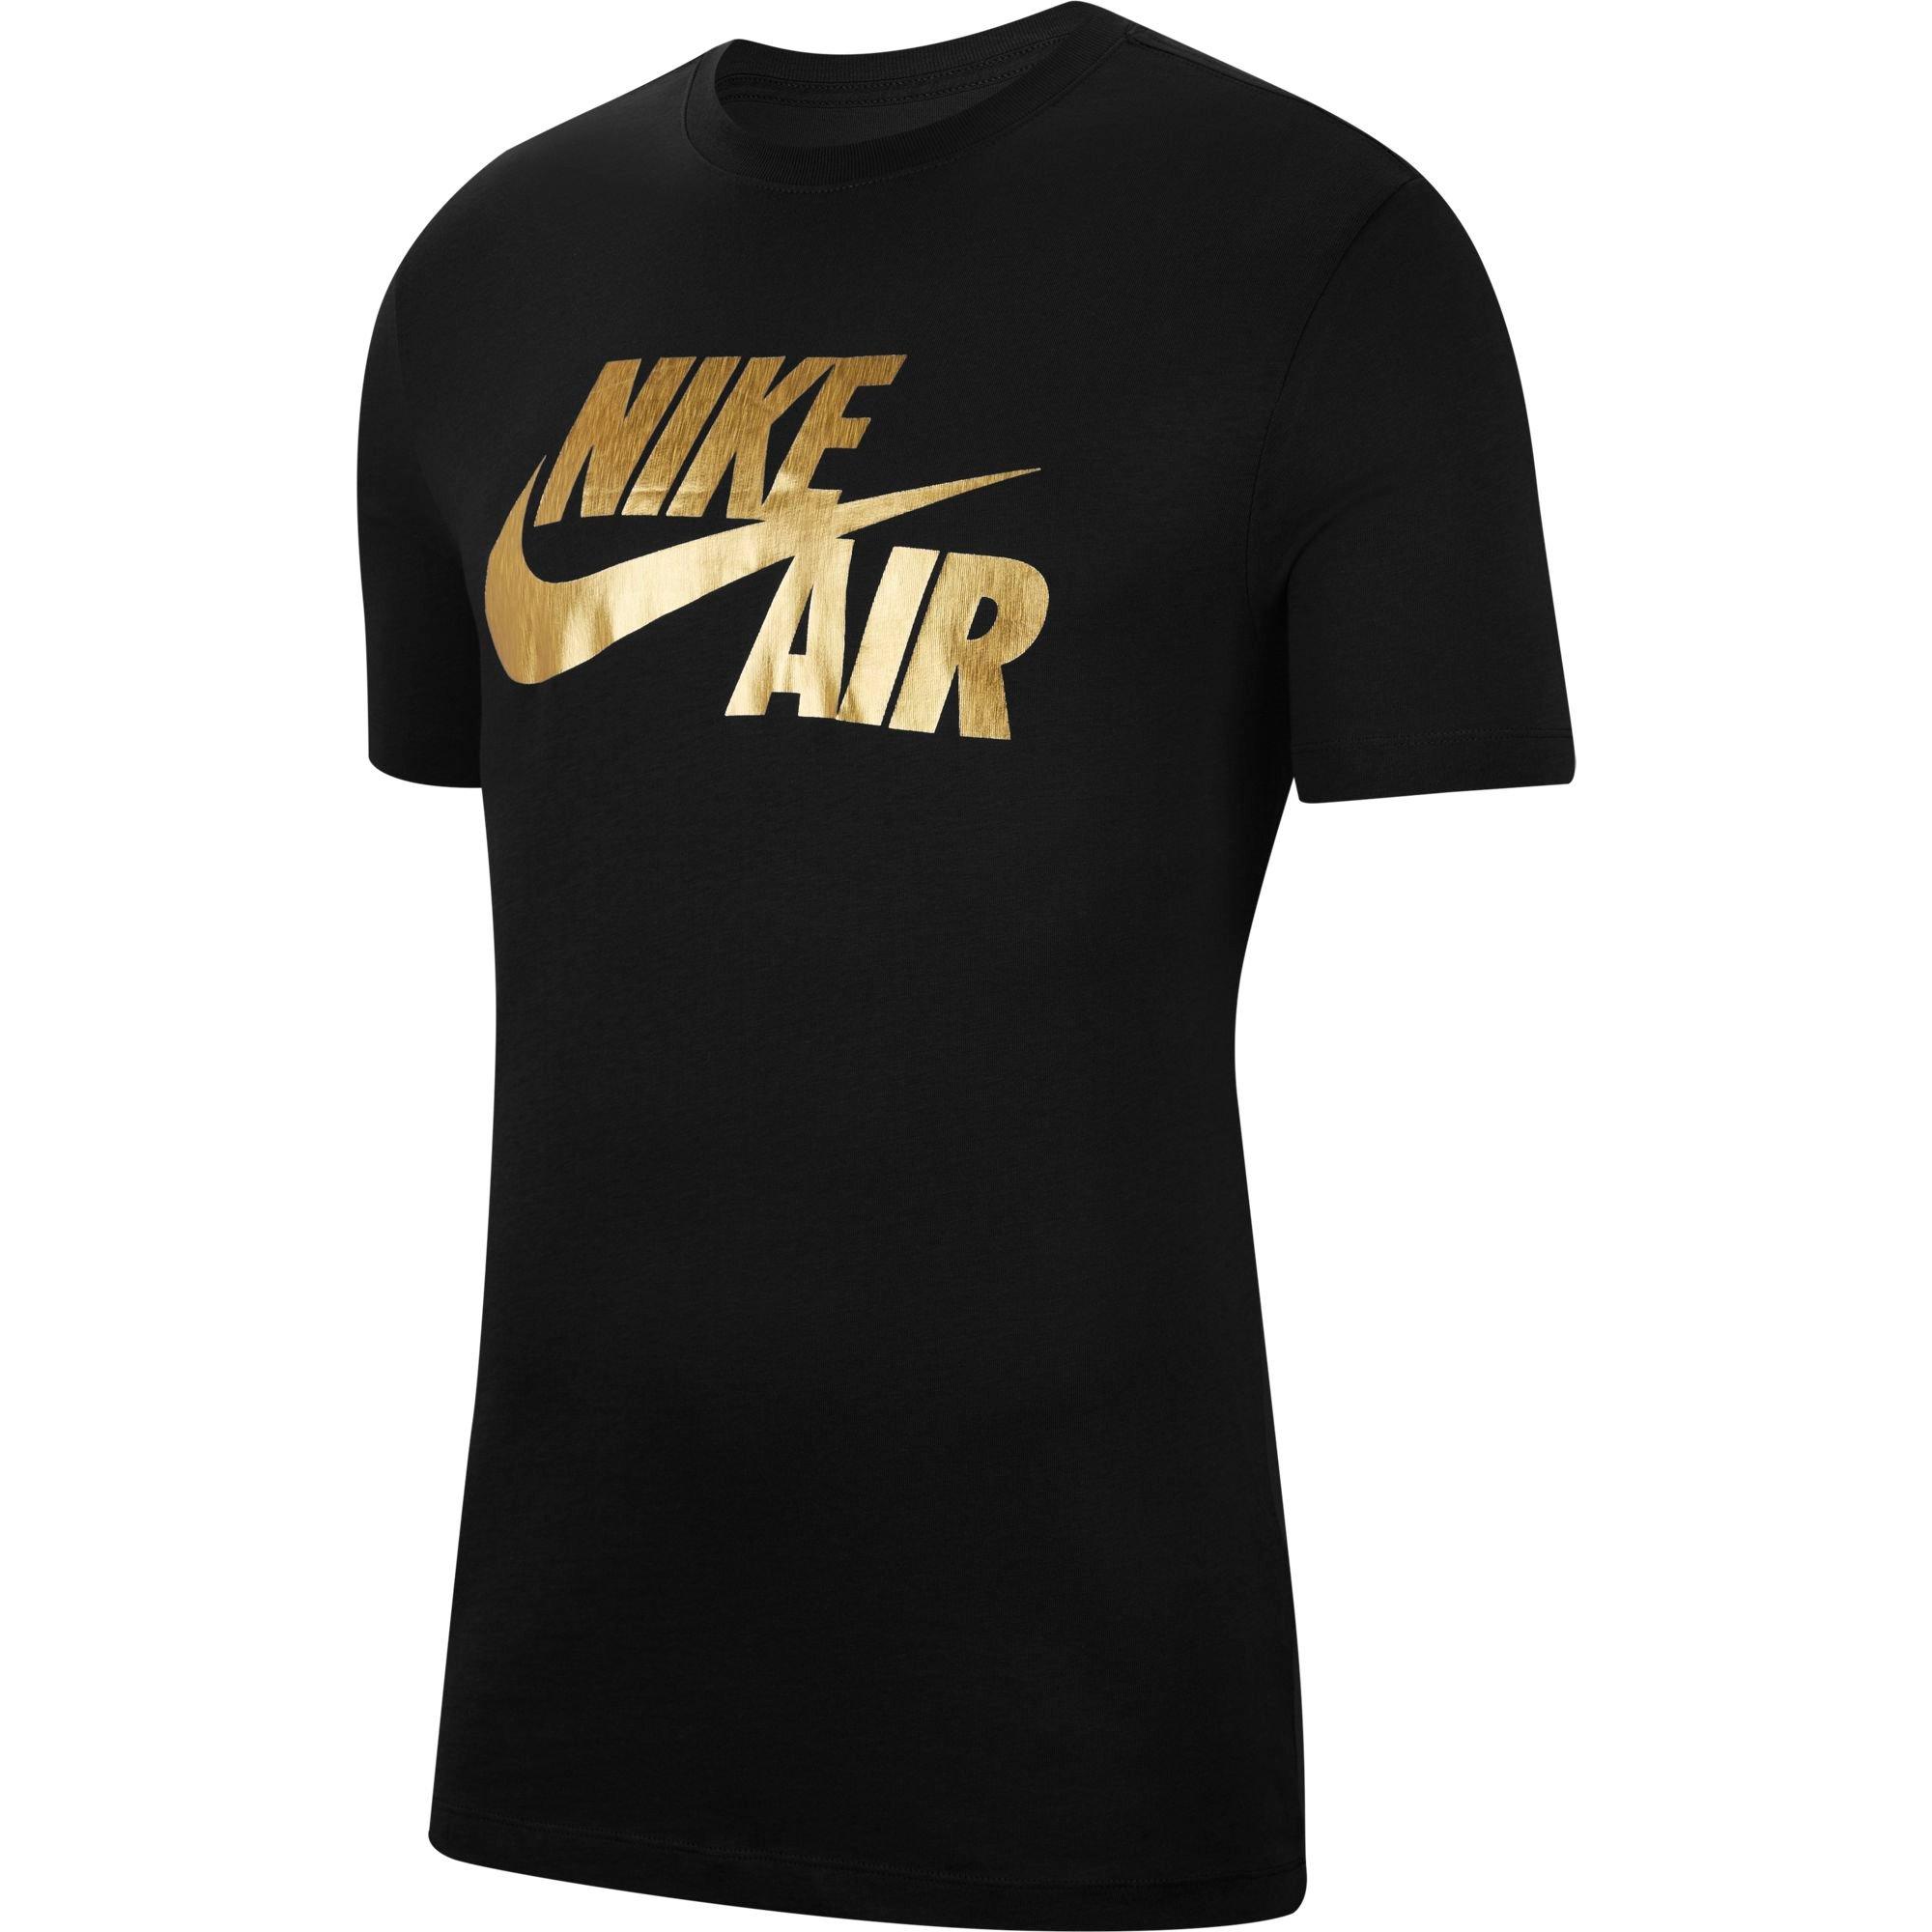 black nike shirt with gold 